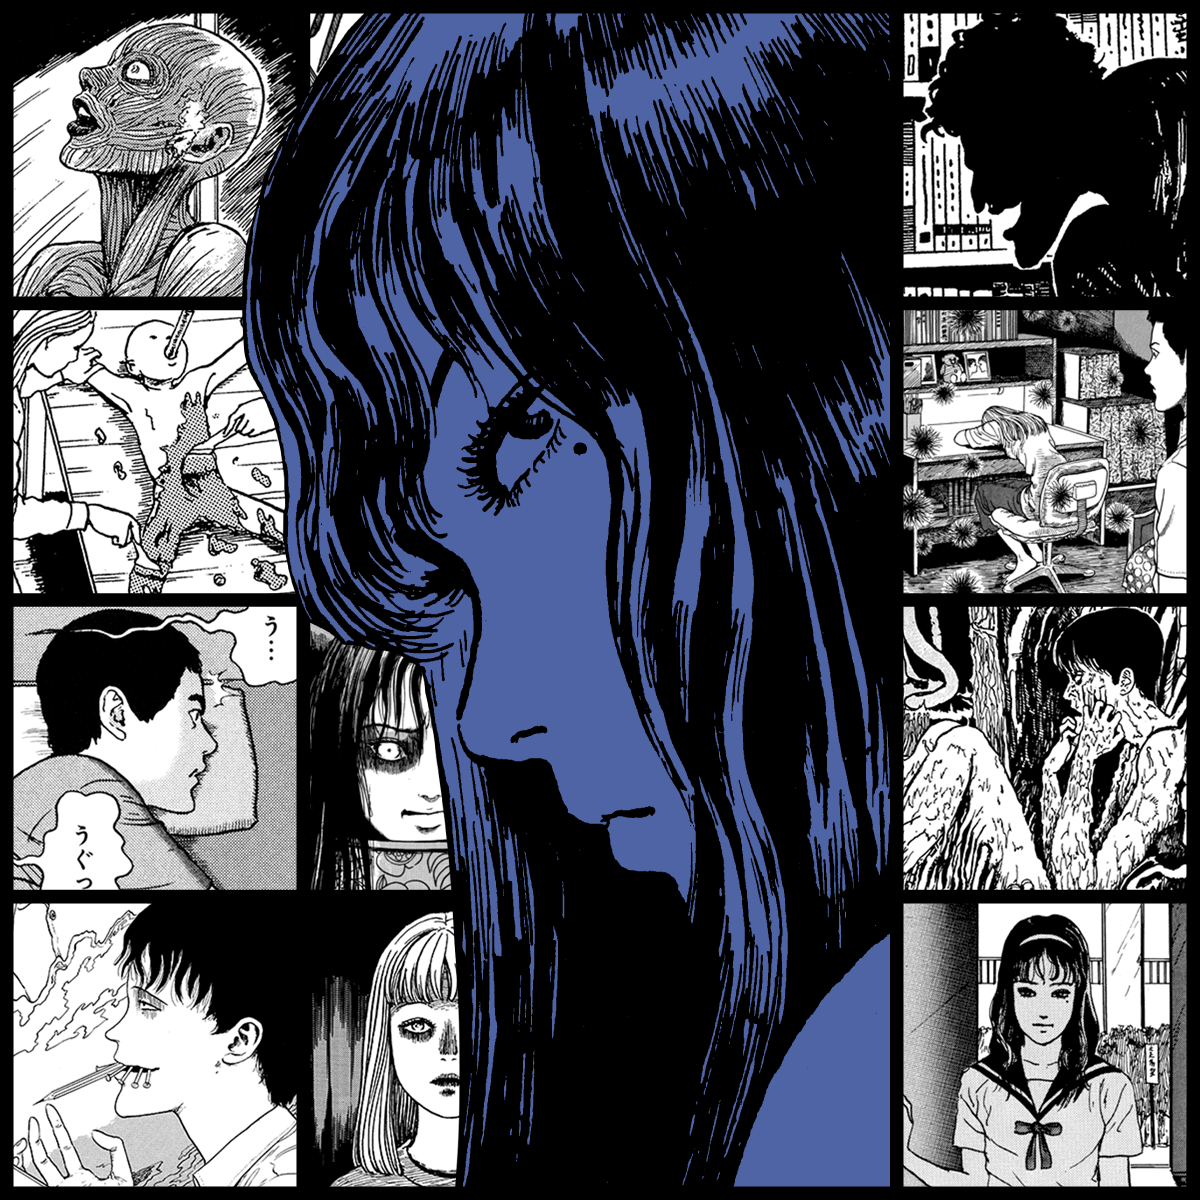 TOMIE by Junji Ito #96